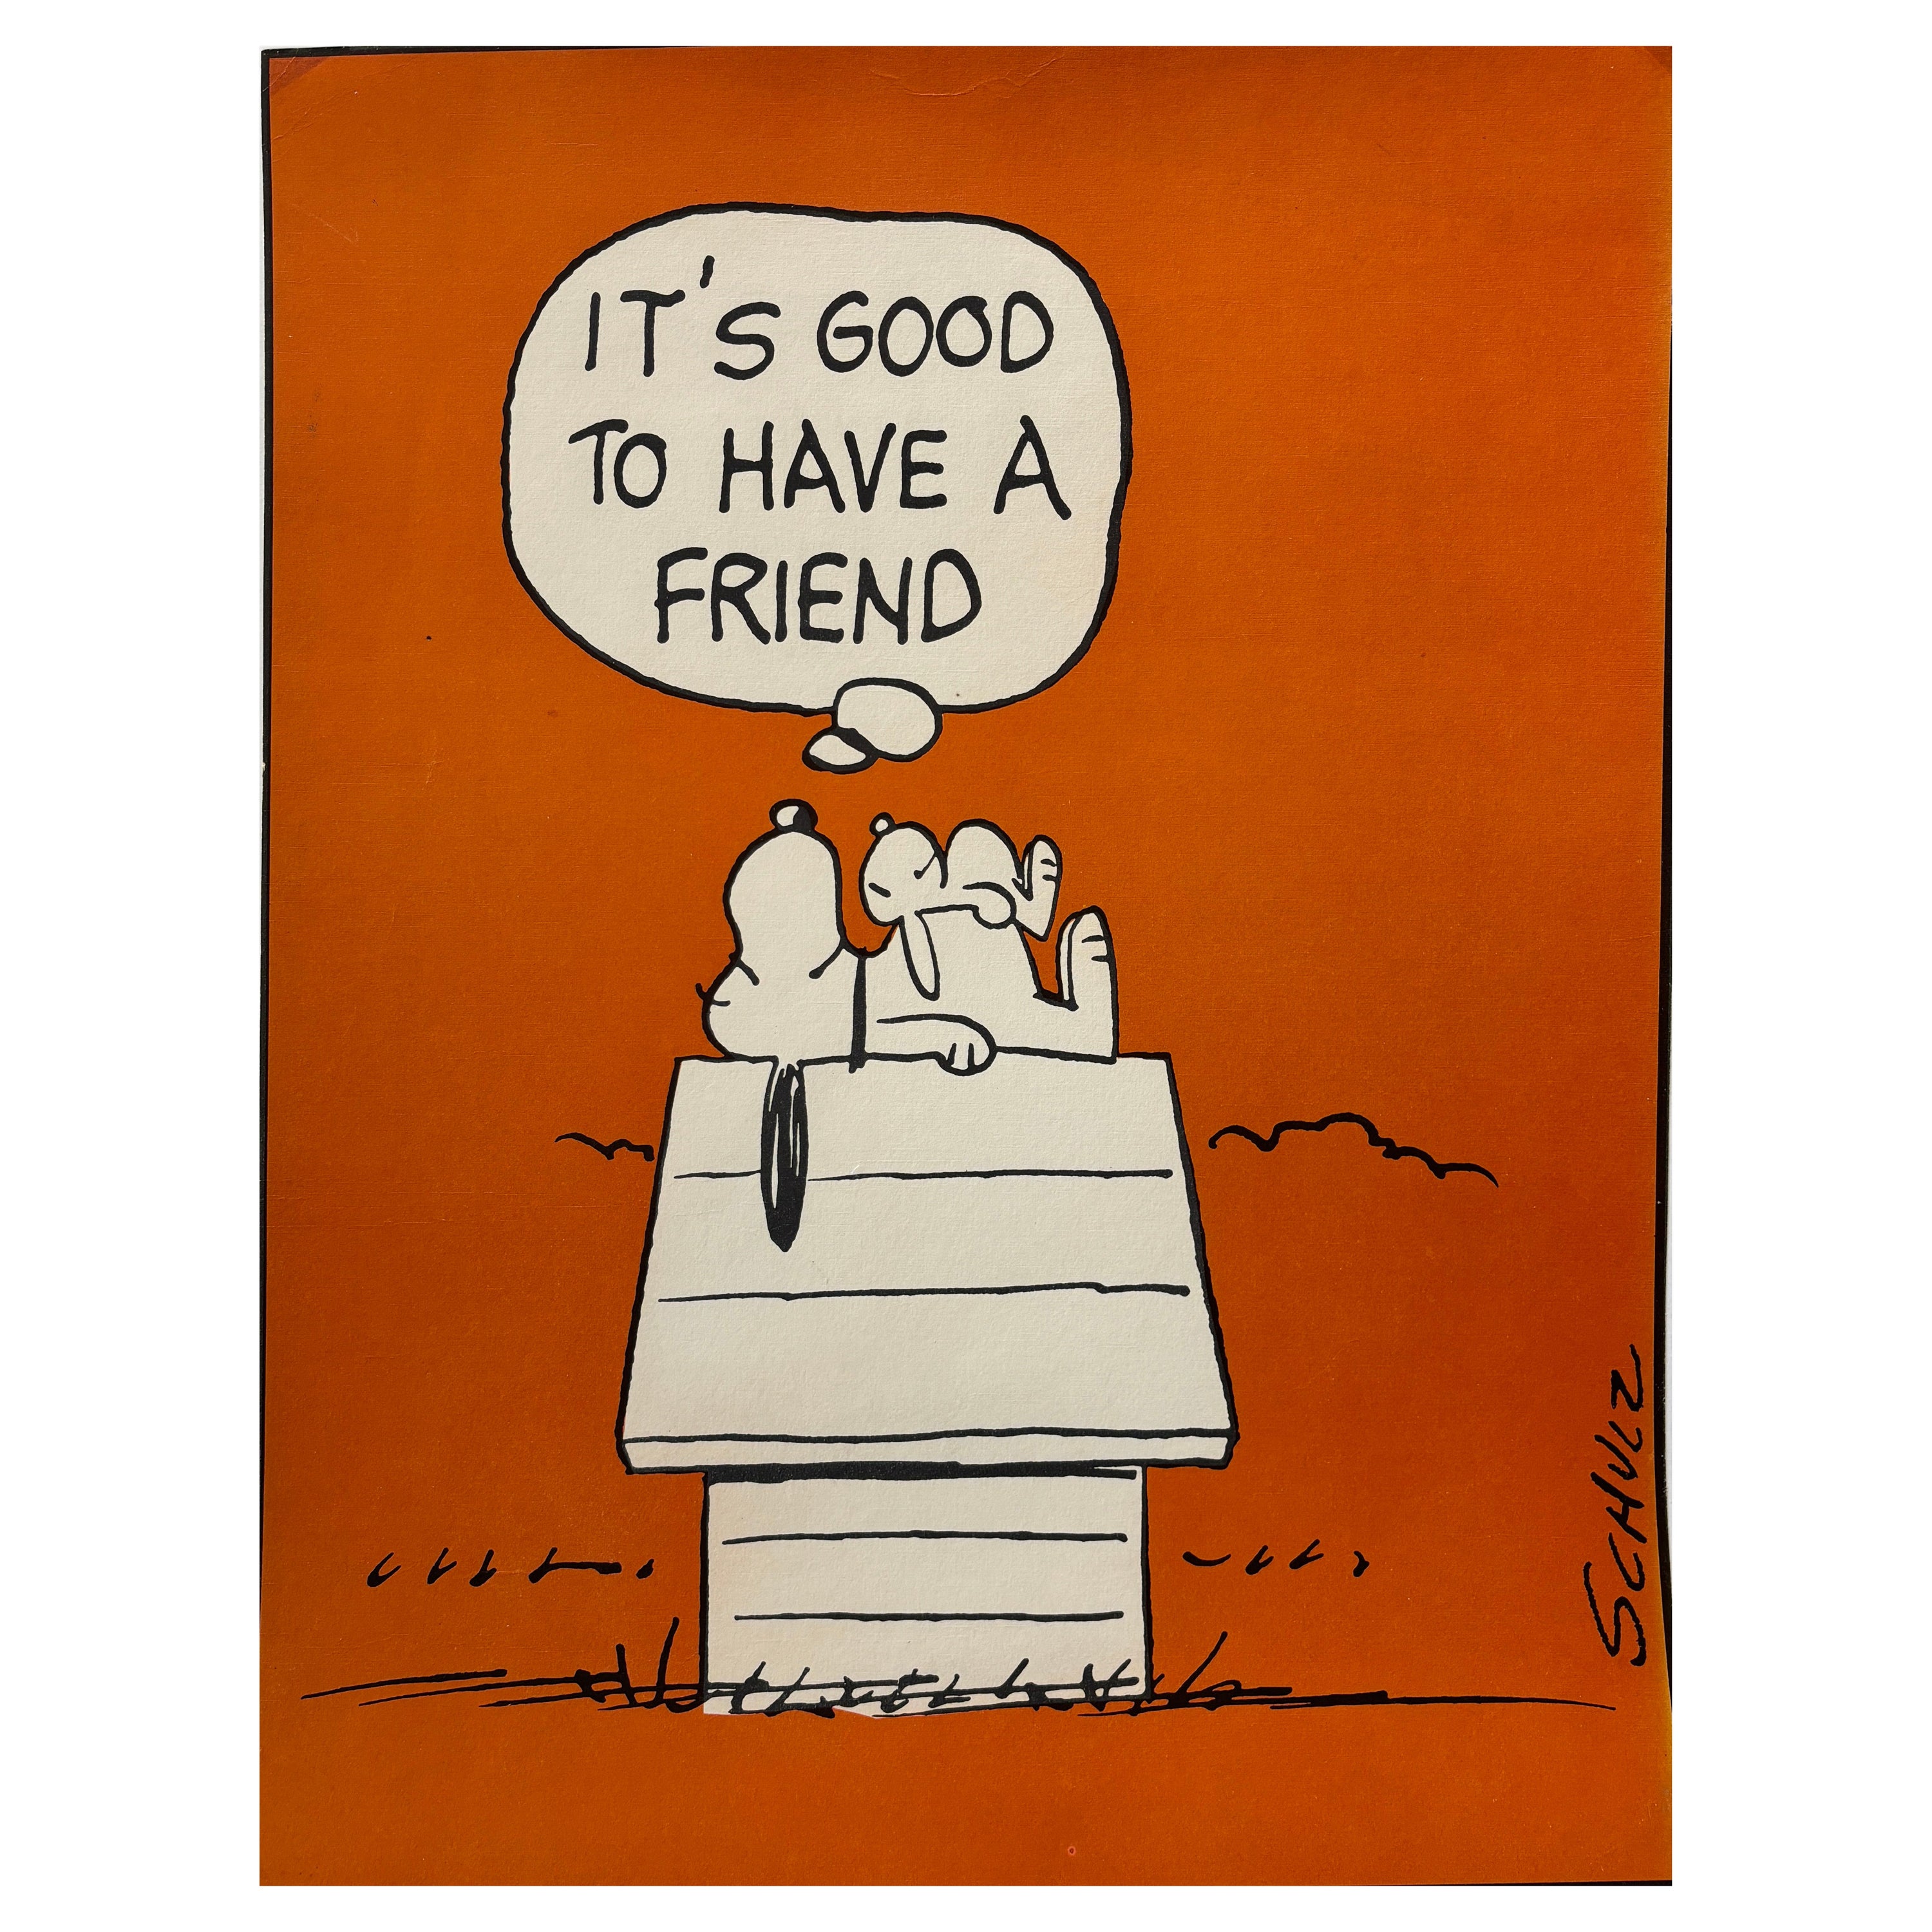 Original Vintage Poster, SNOOPY 'It's Good To Have A Friend' Circa 1958 For Sale